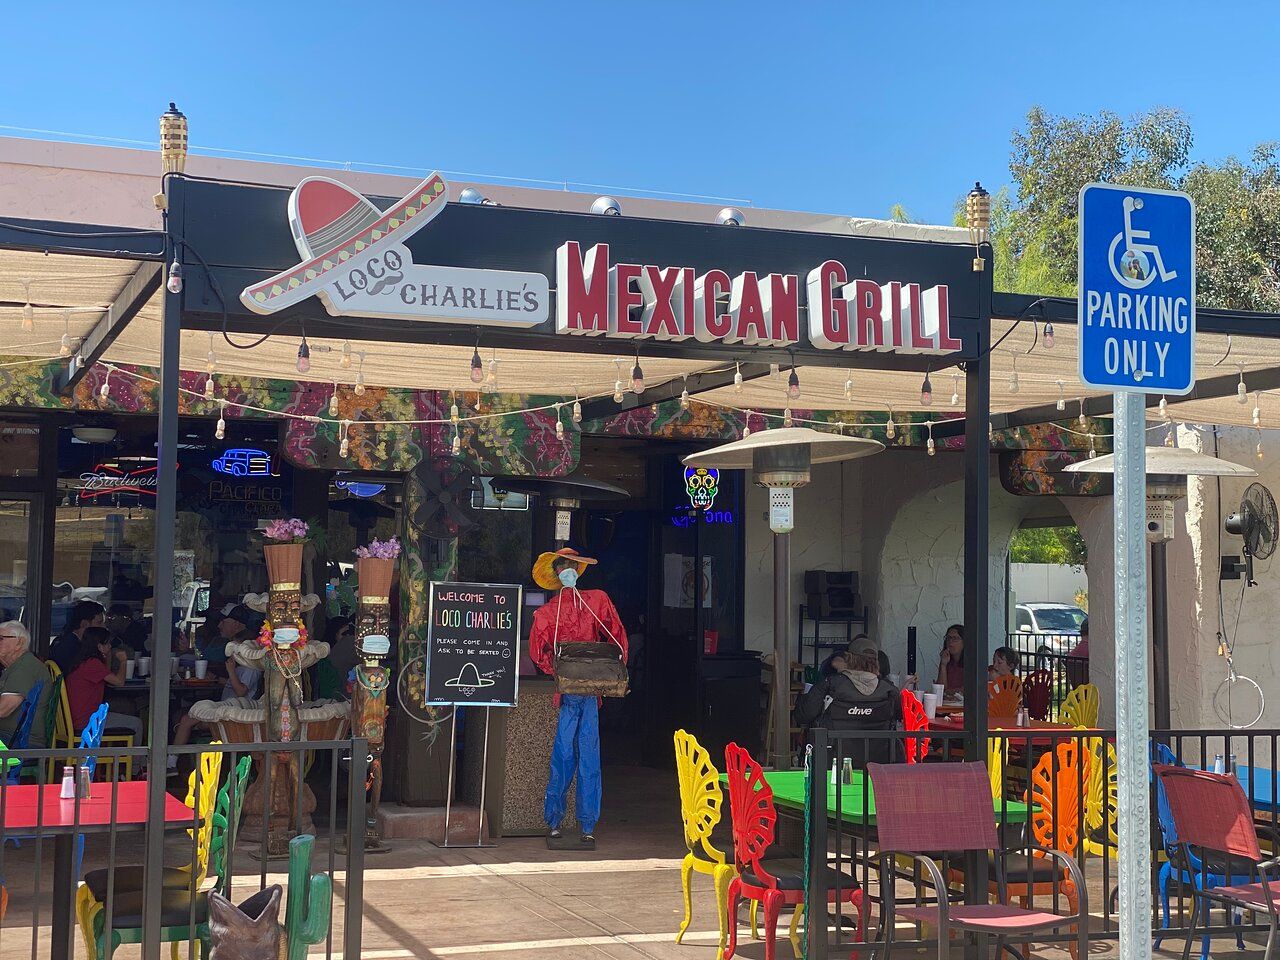 Loco Charlies Mexican Grill Palm Springs is a restaurant that offers fresh food with the flavors you crave. Food is made fresh every day and customers can choose from a salsa bar for their meal. Loco Charlie